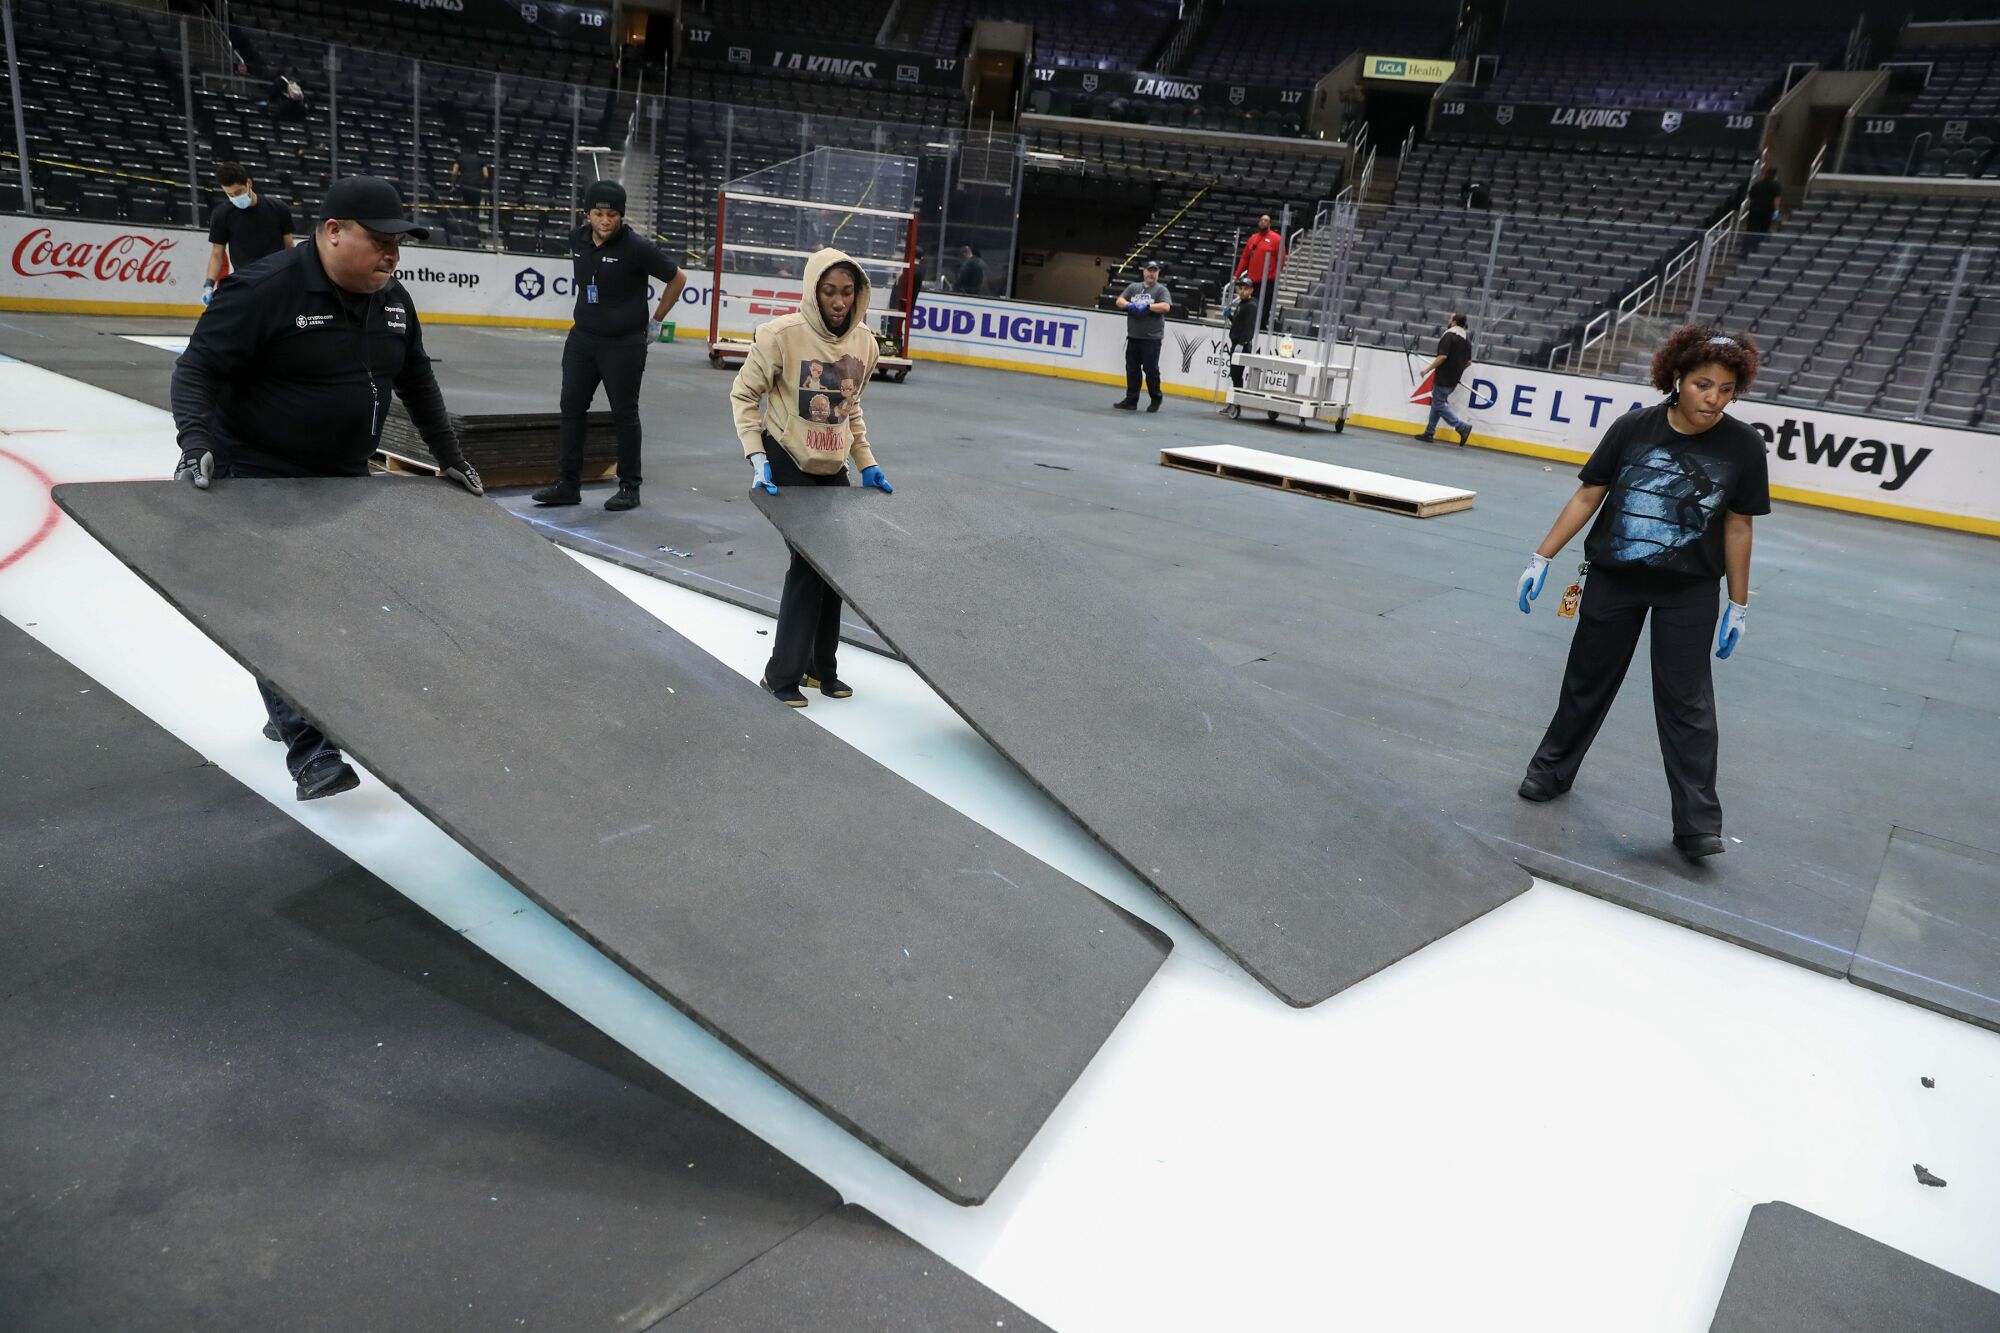 Employee at Crypto.com Arena remove rubber mats covering the ice.